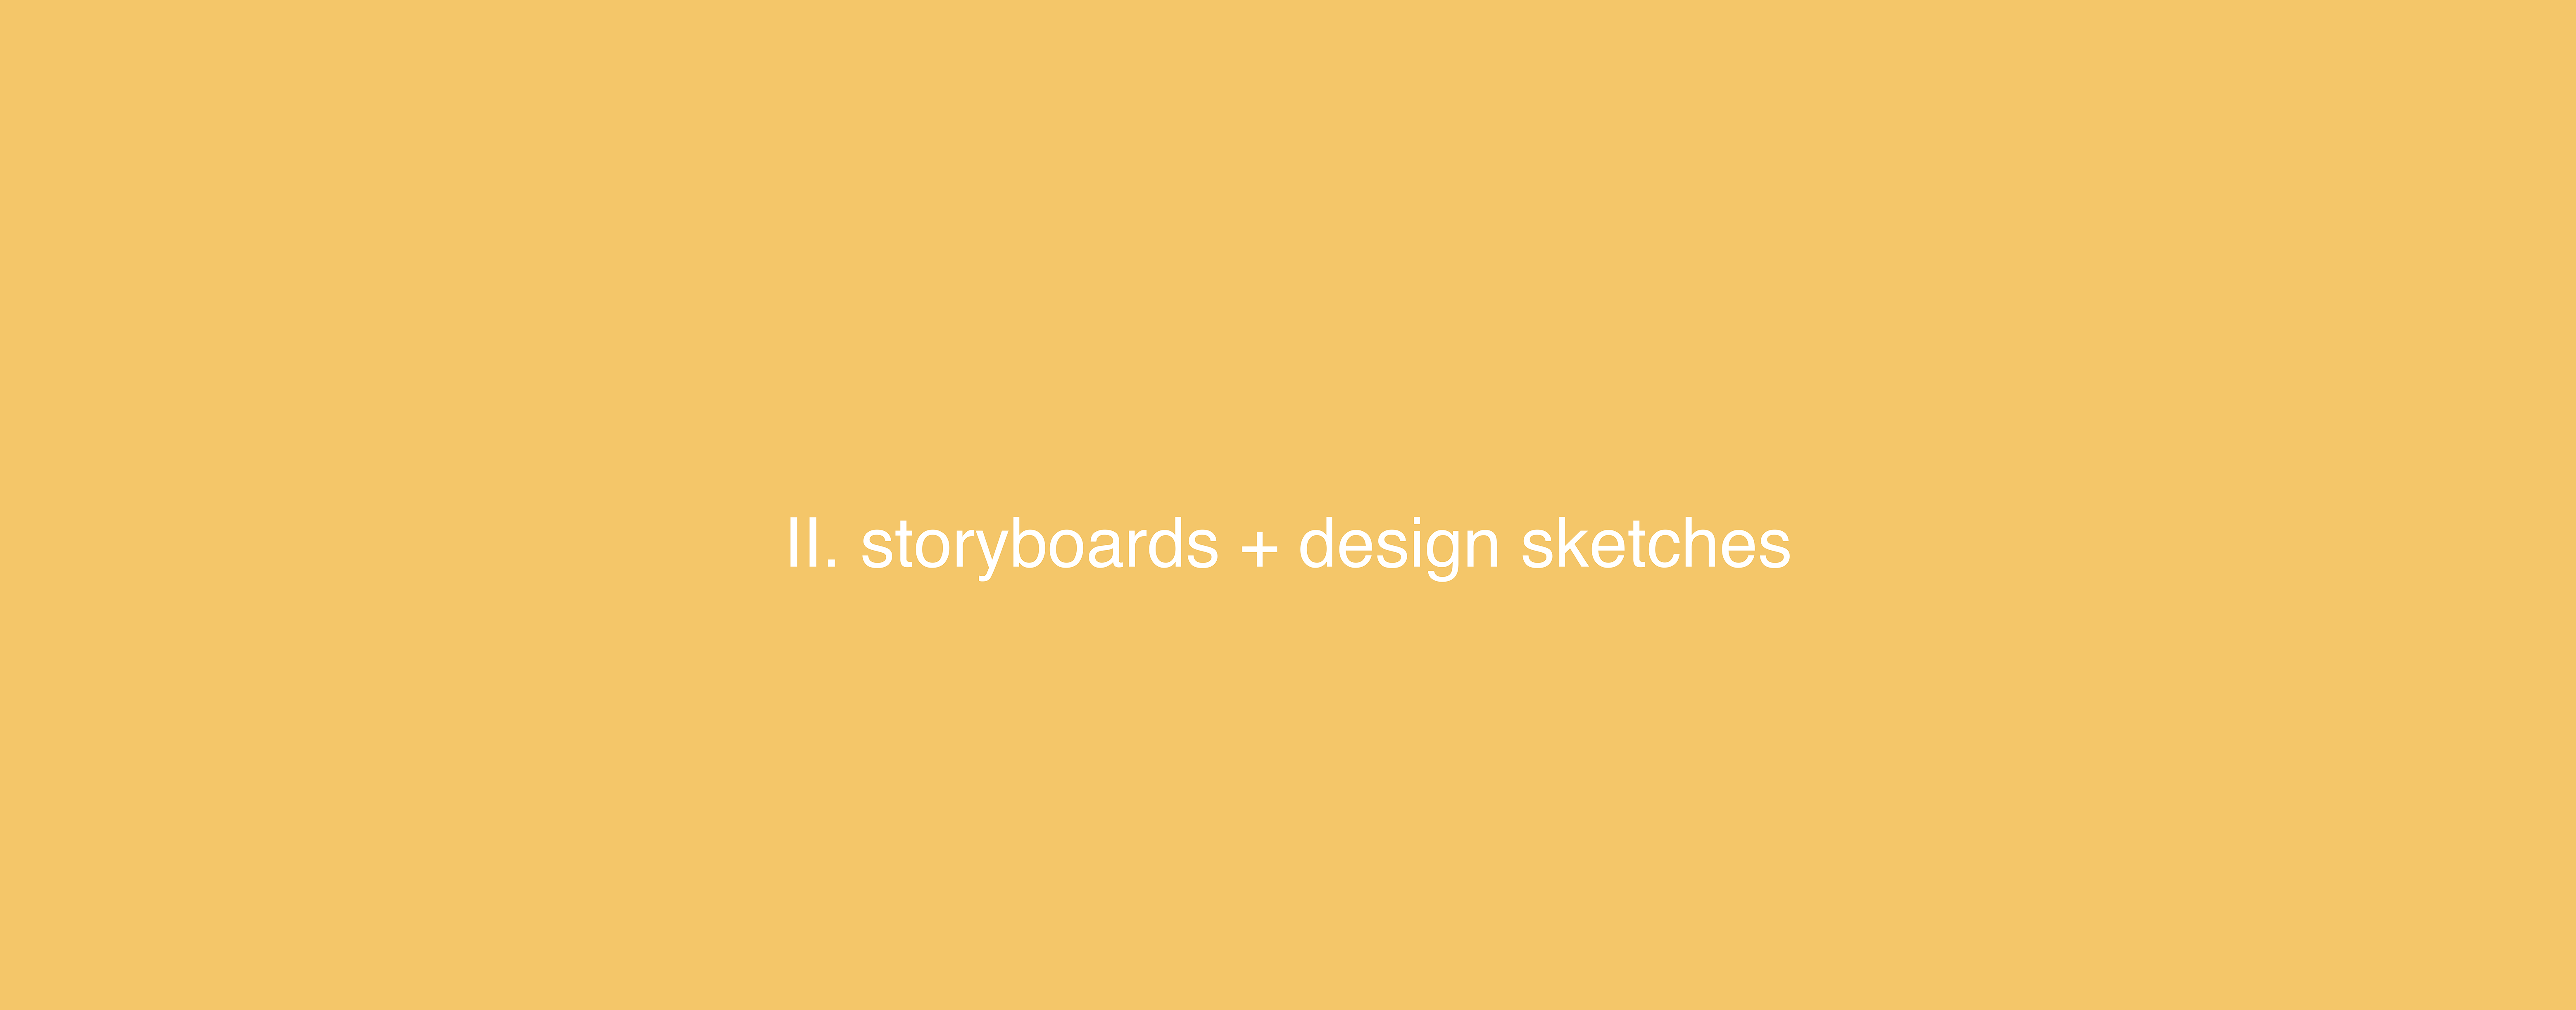 Storyboards and Design Sketches